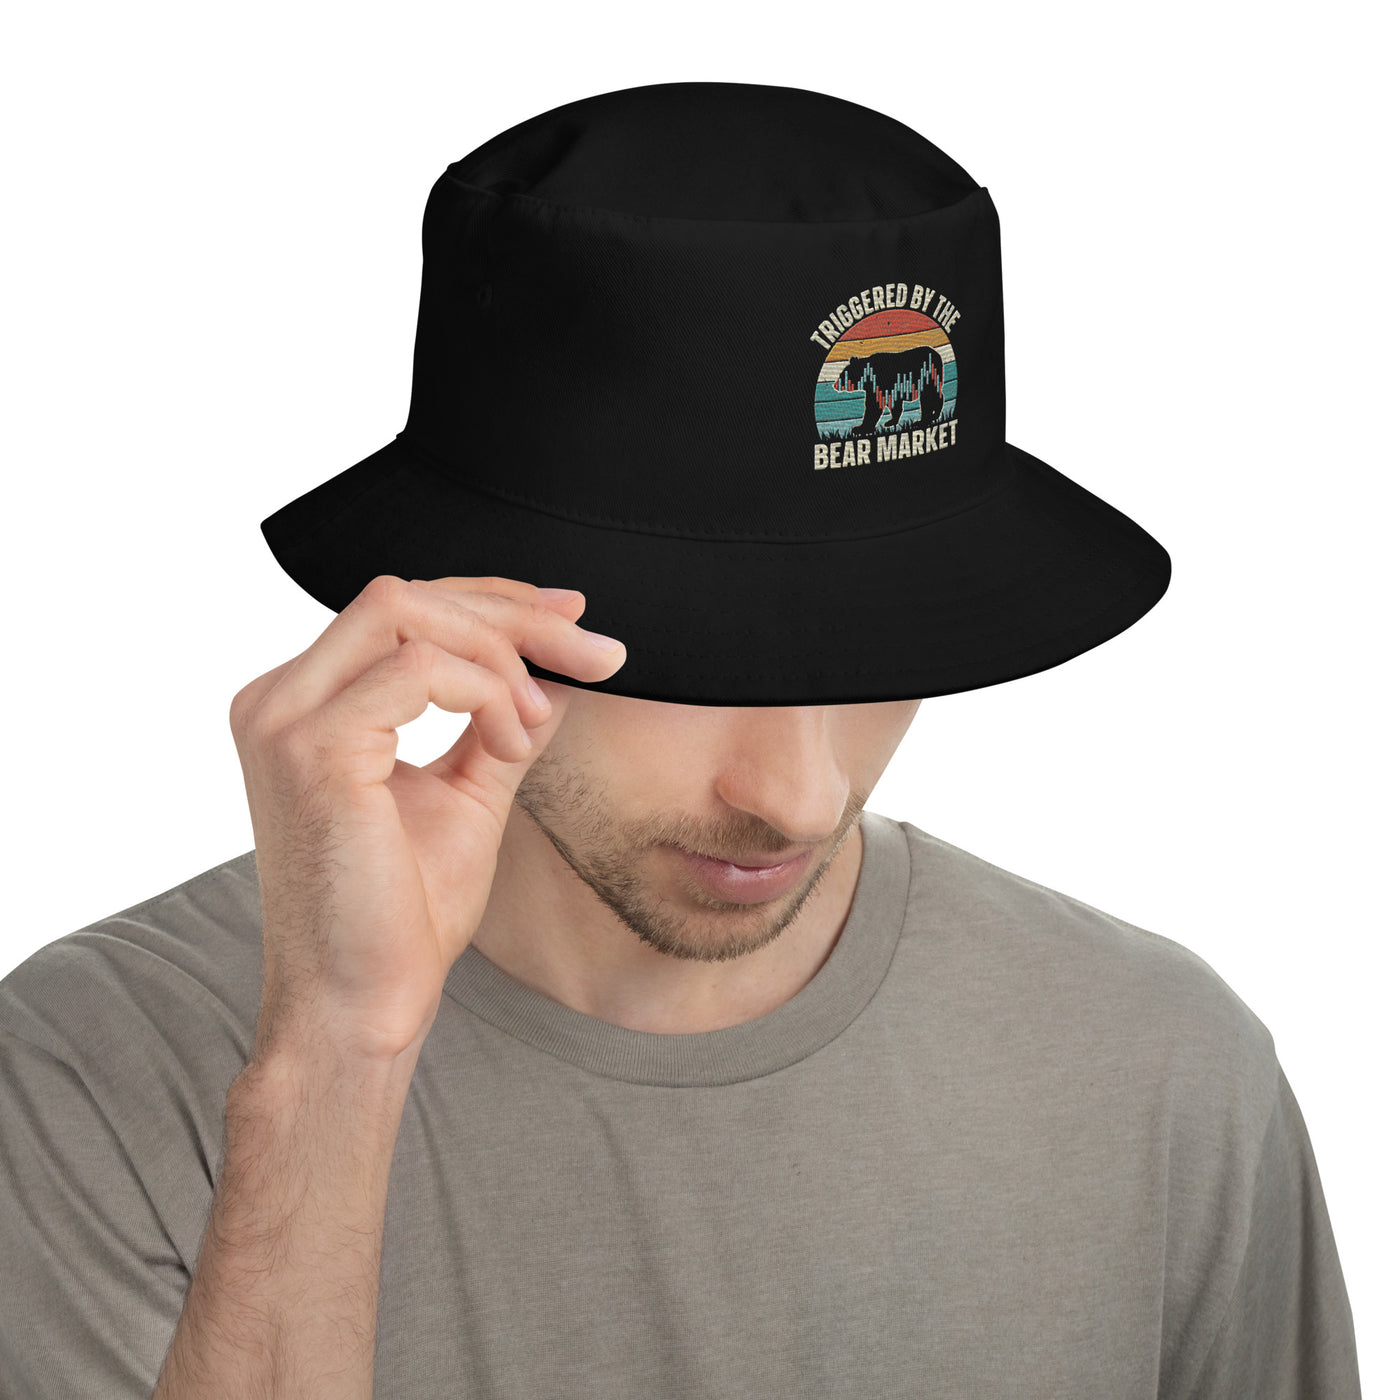 Triggered by the Bear Market - Bucket Hat